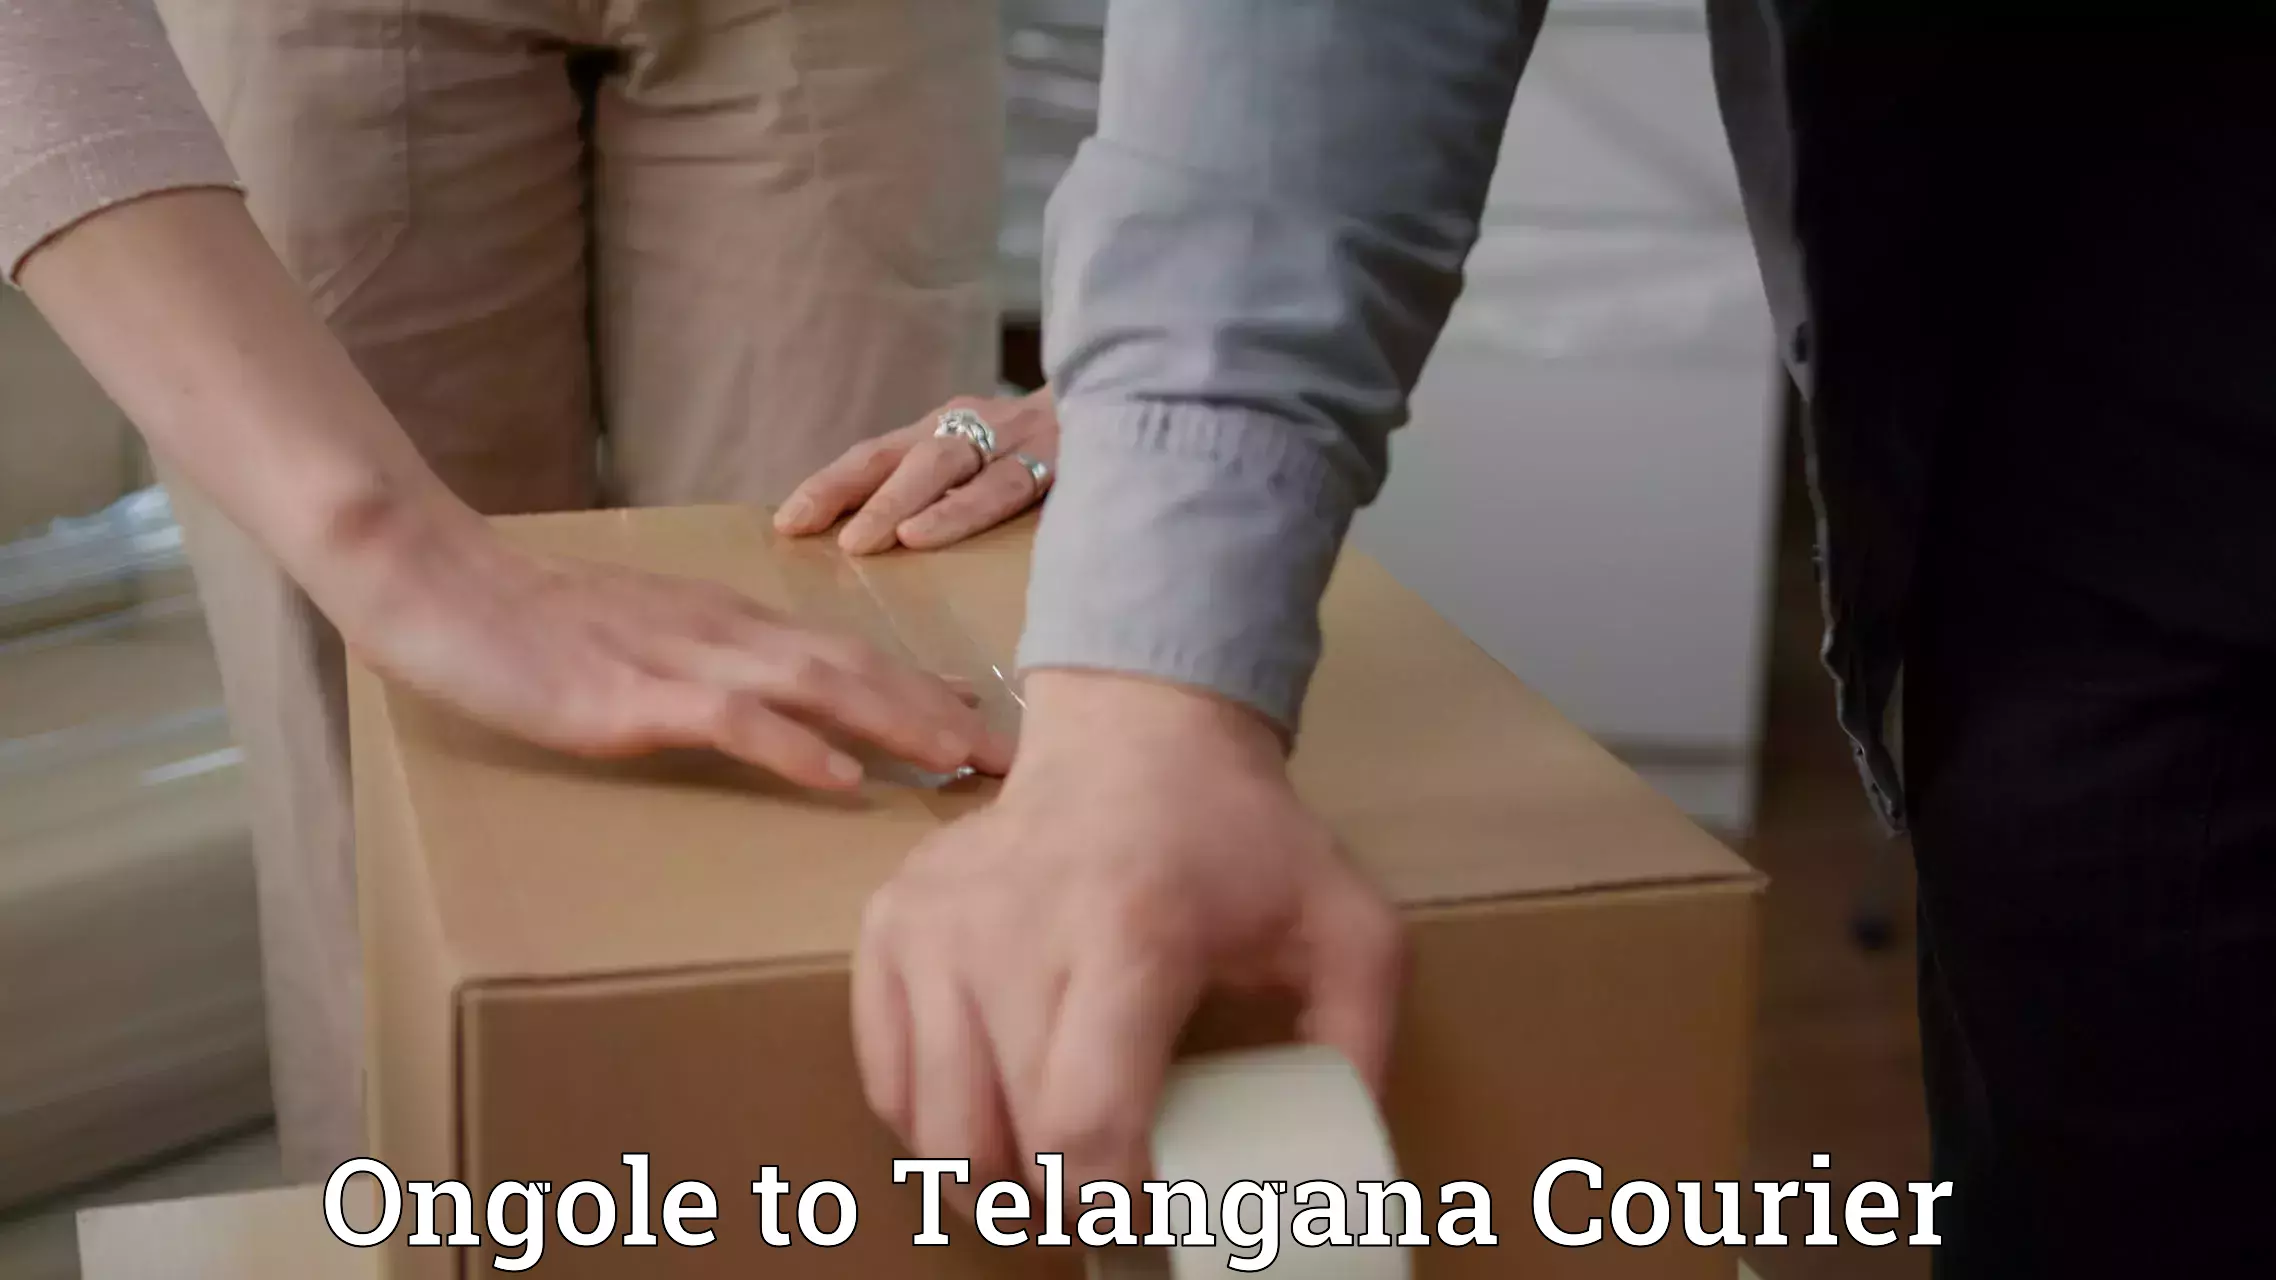 High-speed parcel service Ongole to Atmakur Wanaparthy